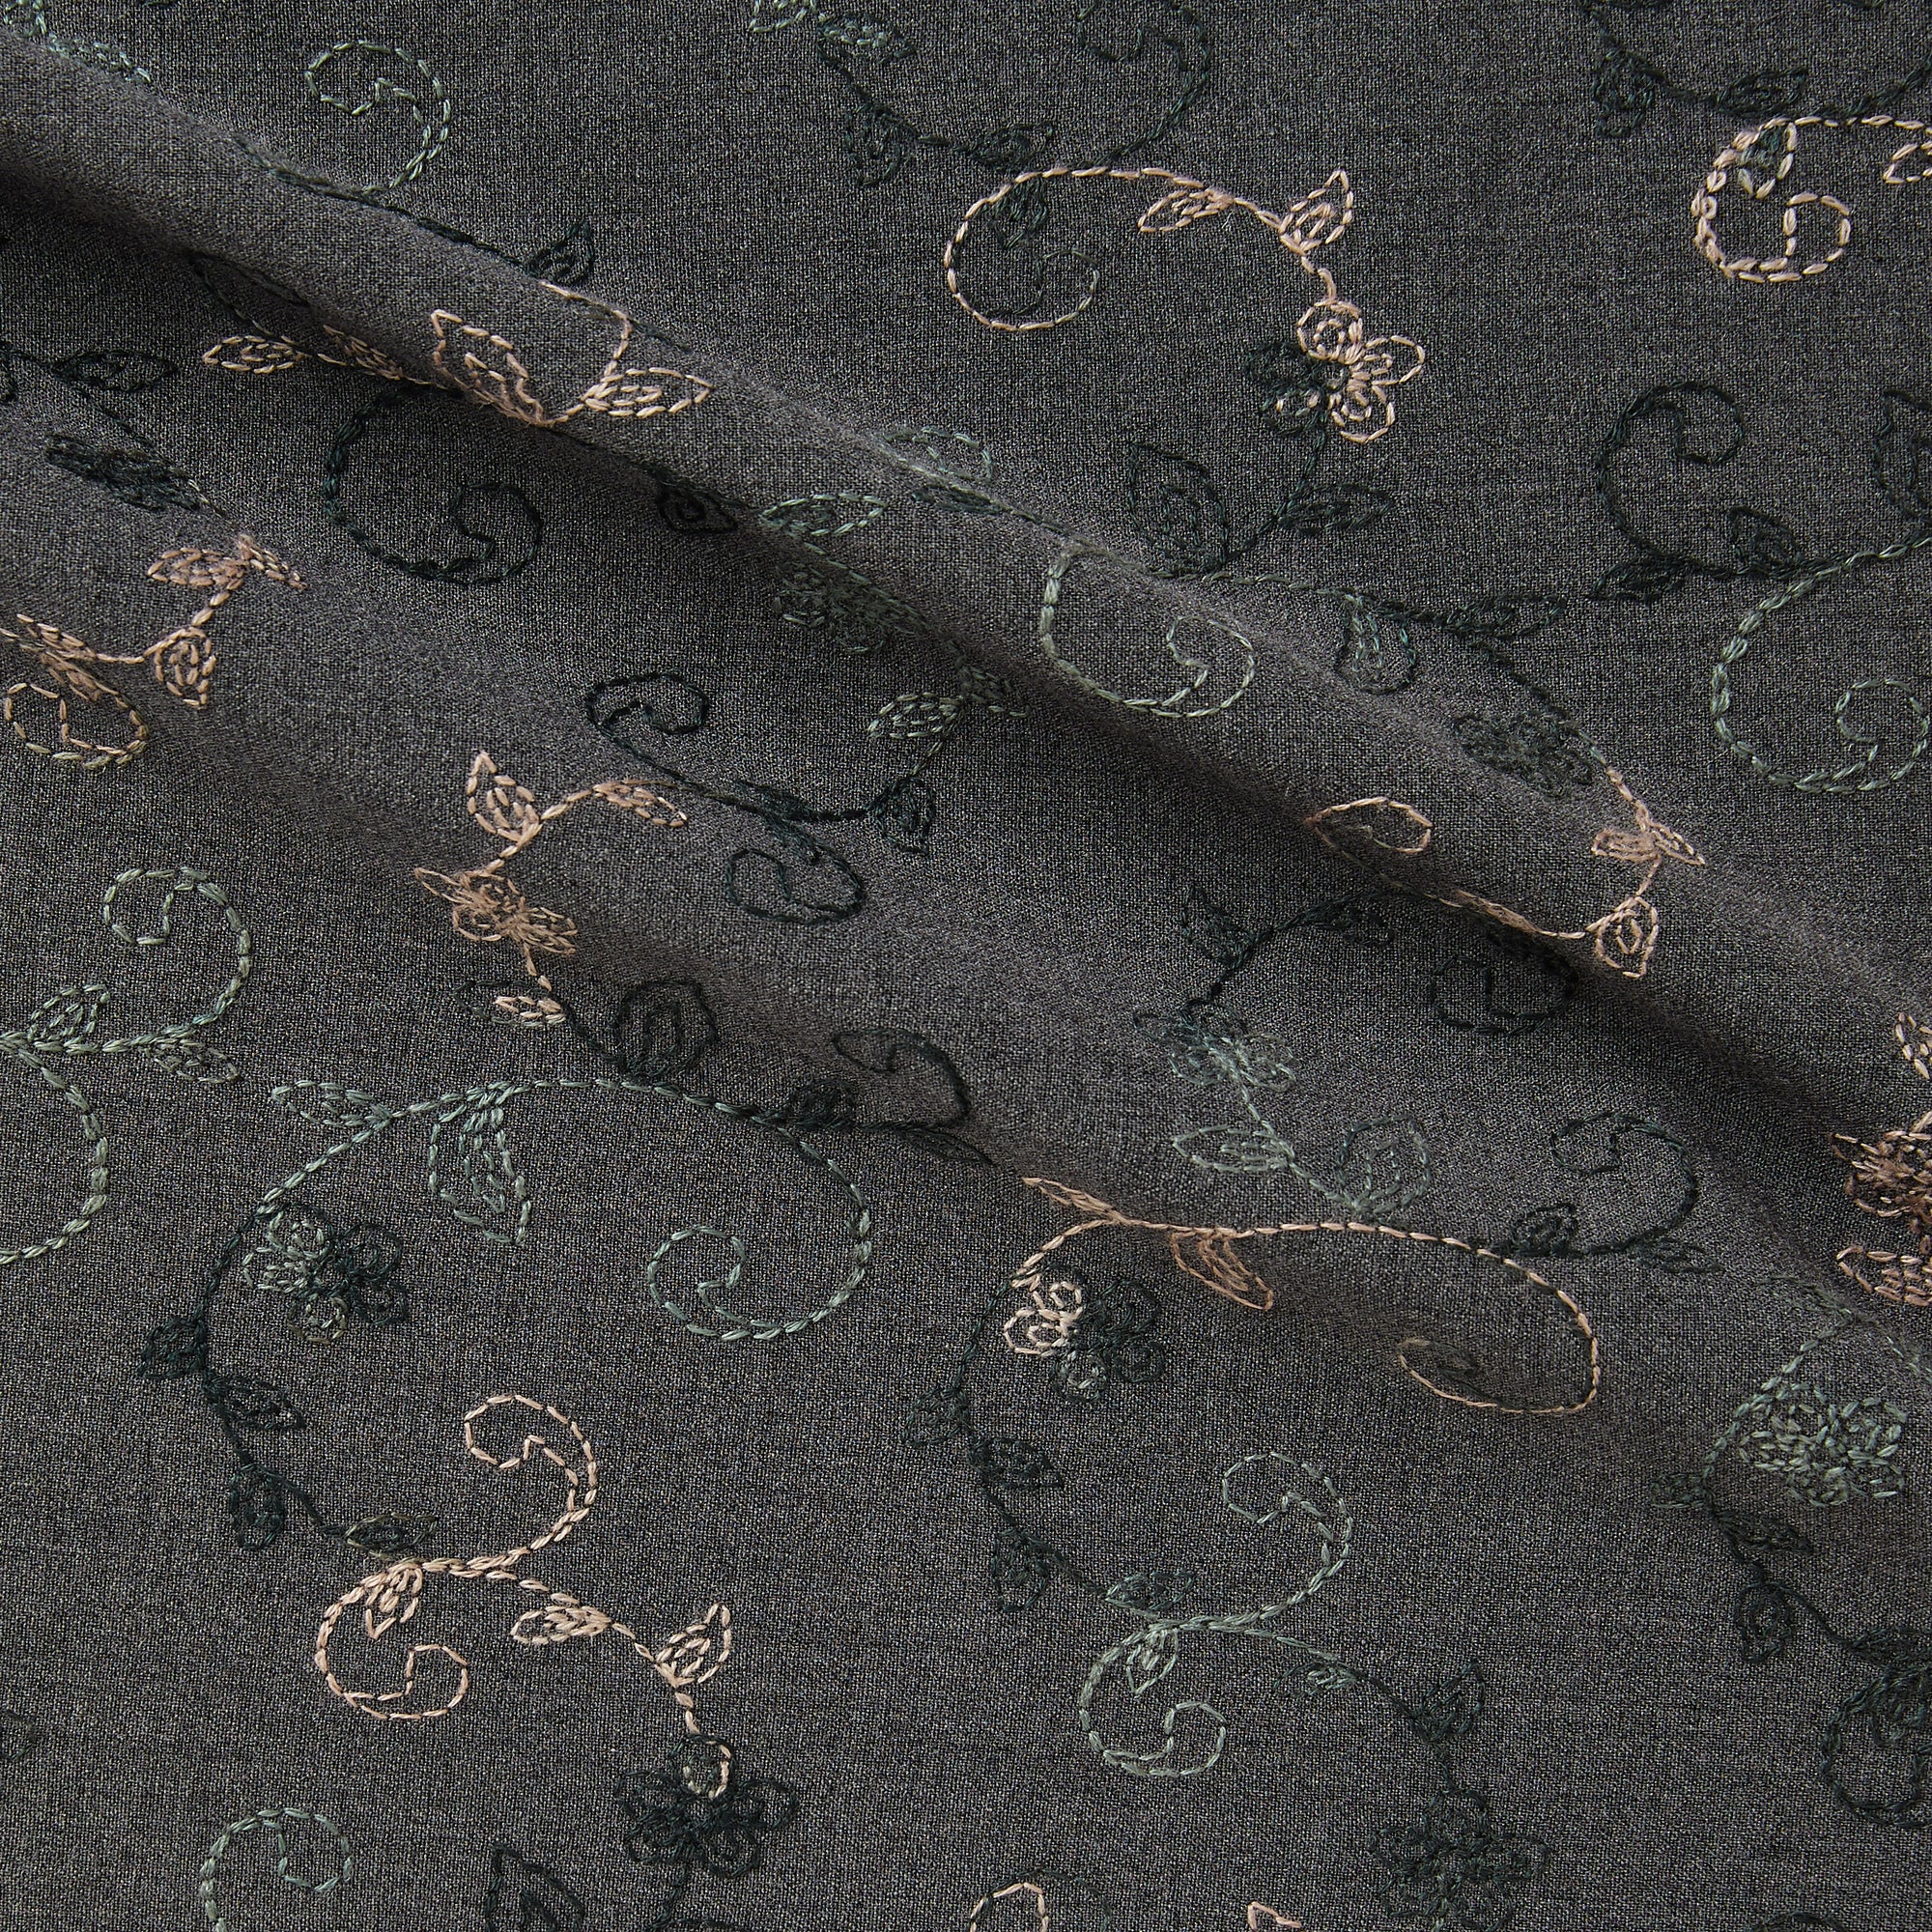 Illustrating zara a smooth stretch polyester and rayon with spandex  with delicate floral embroidery on charcoal grey colored background